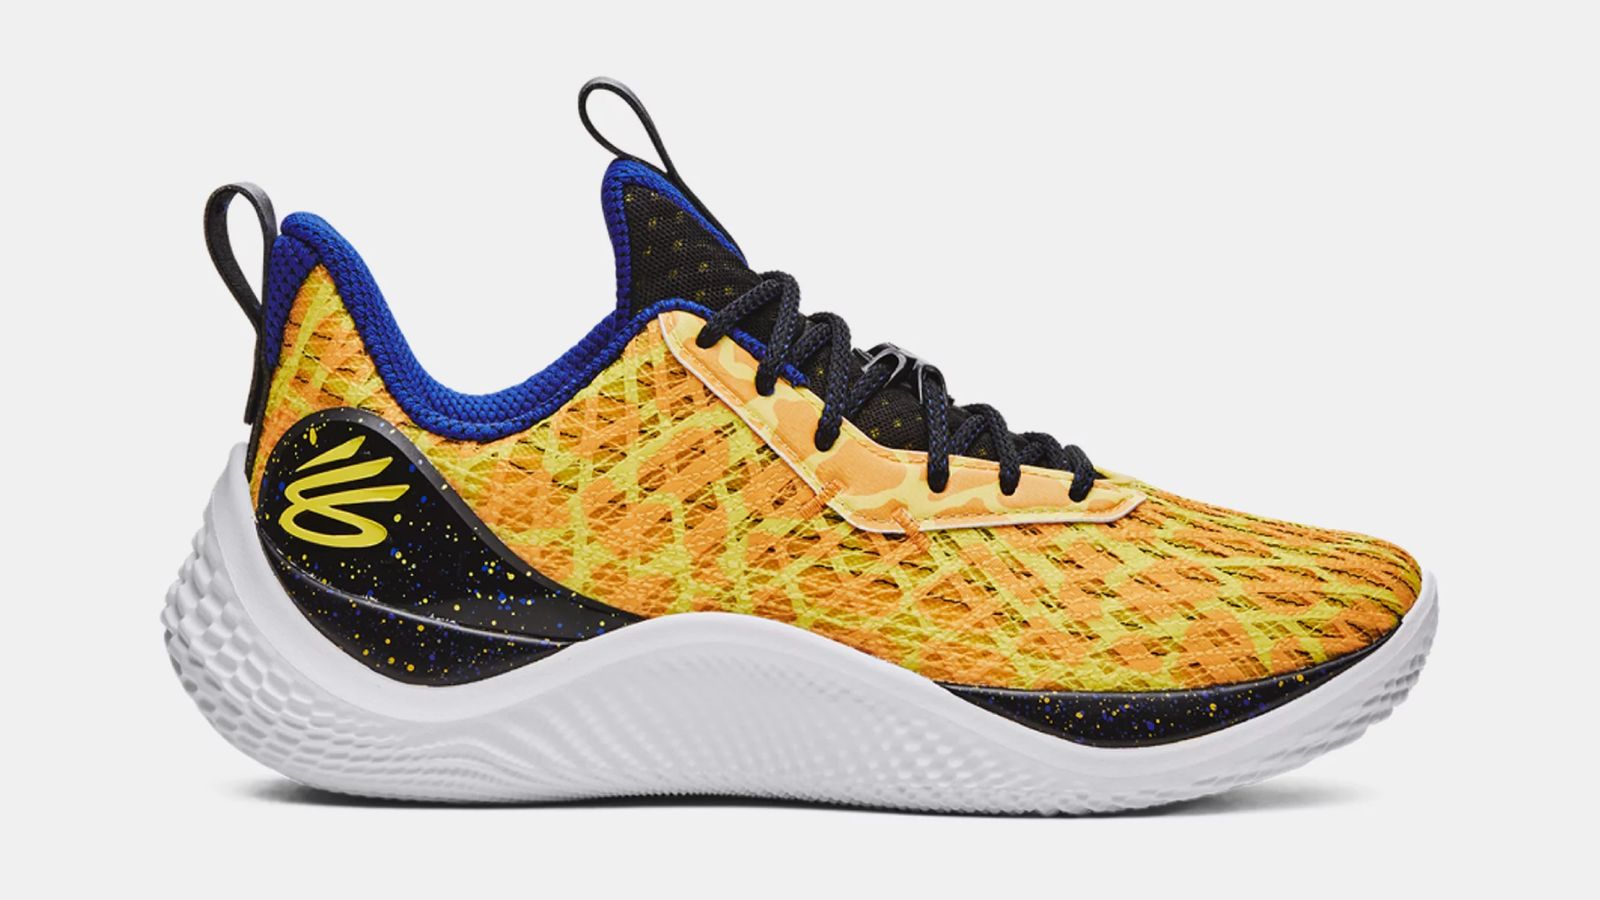 Under Armour Curry Flow 10 product image of a yellow and black sneaker featuring a blue inner lining and white sole.